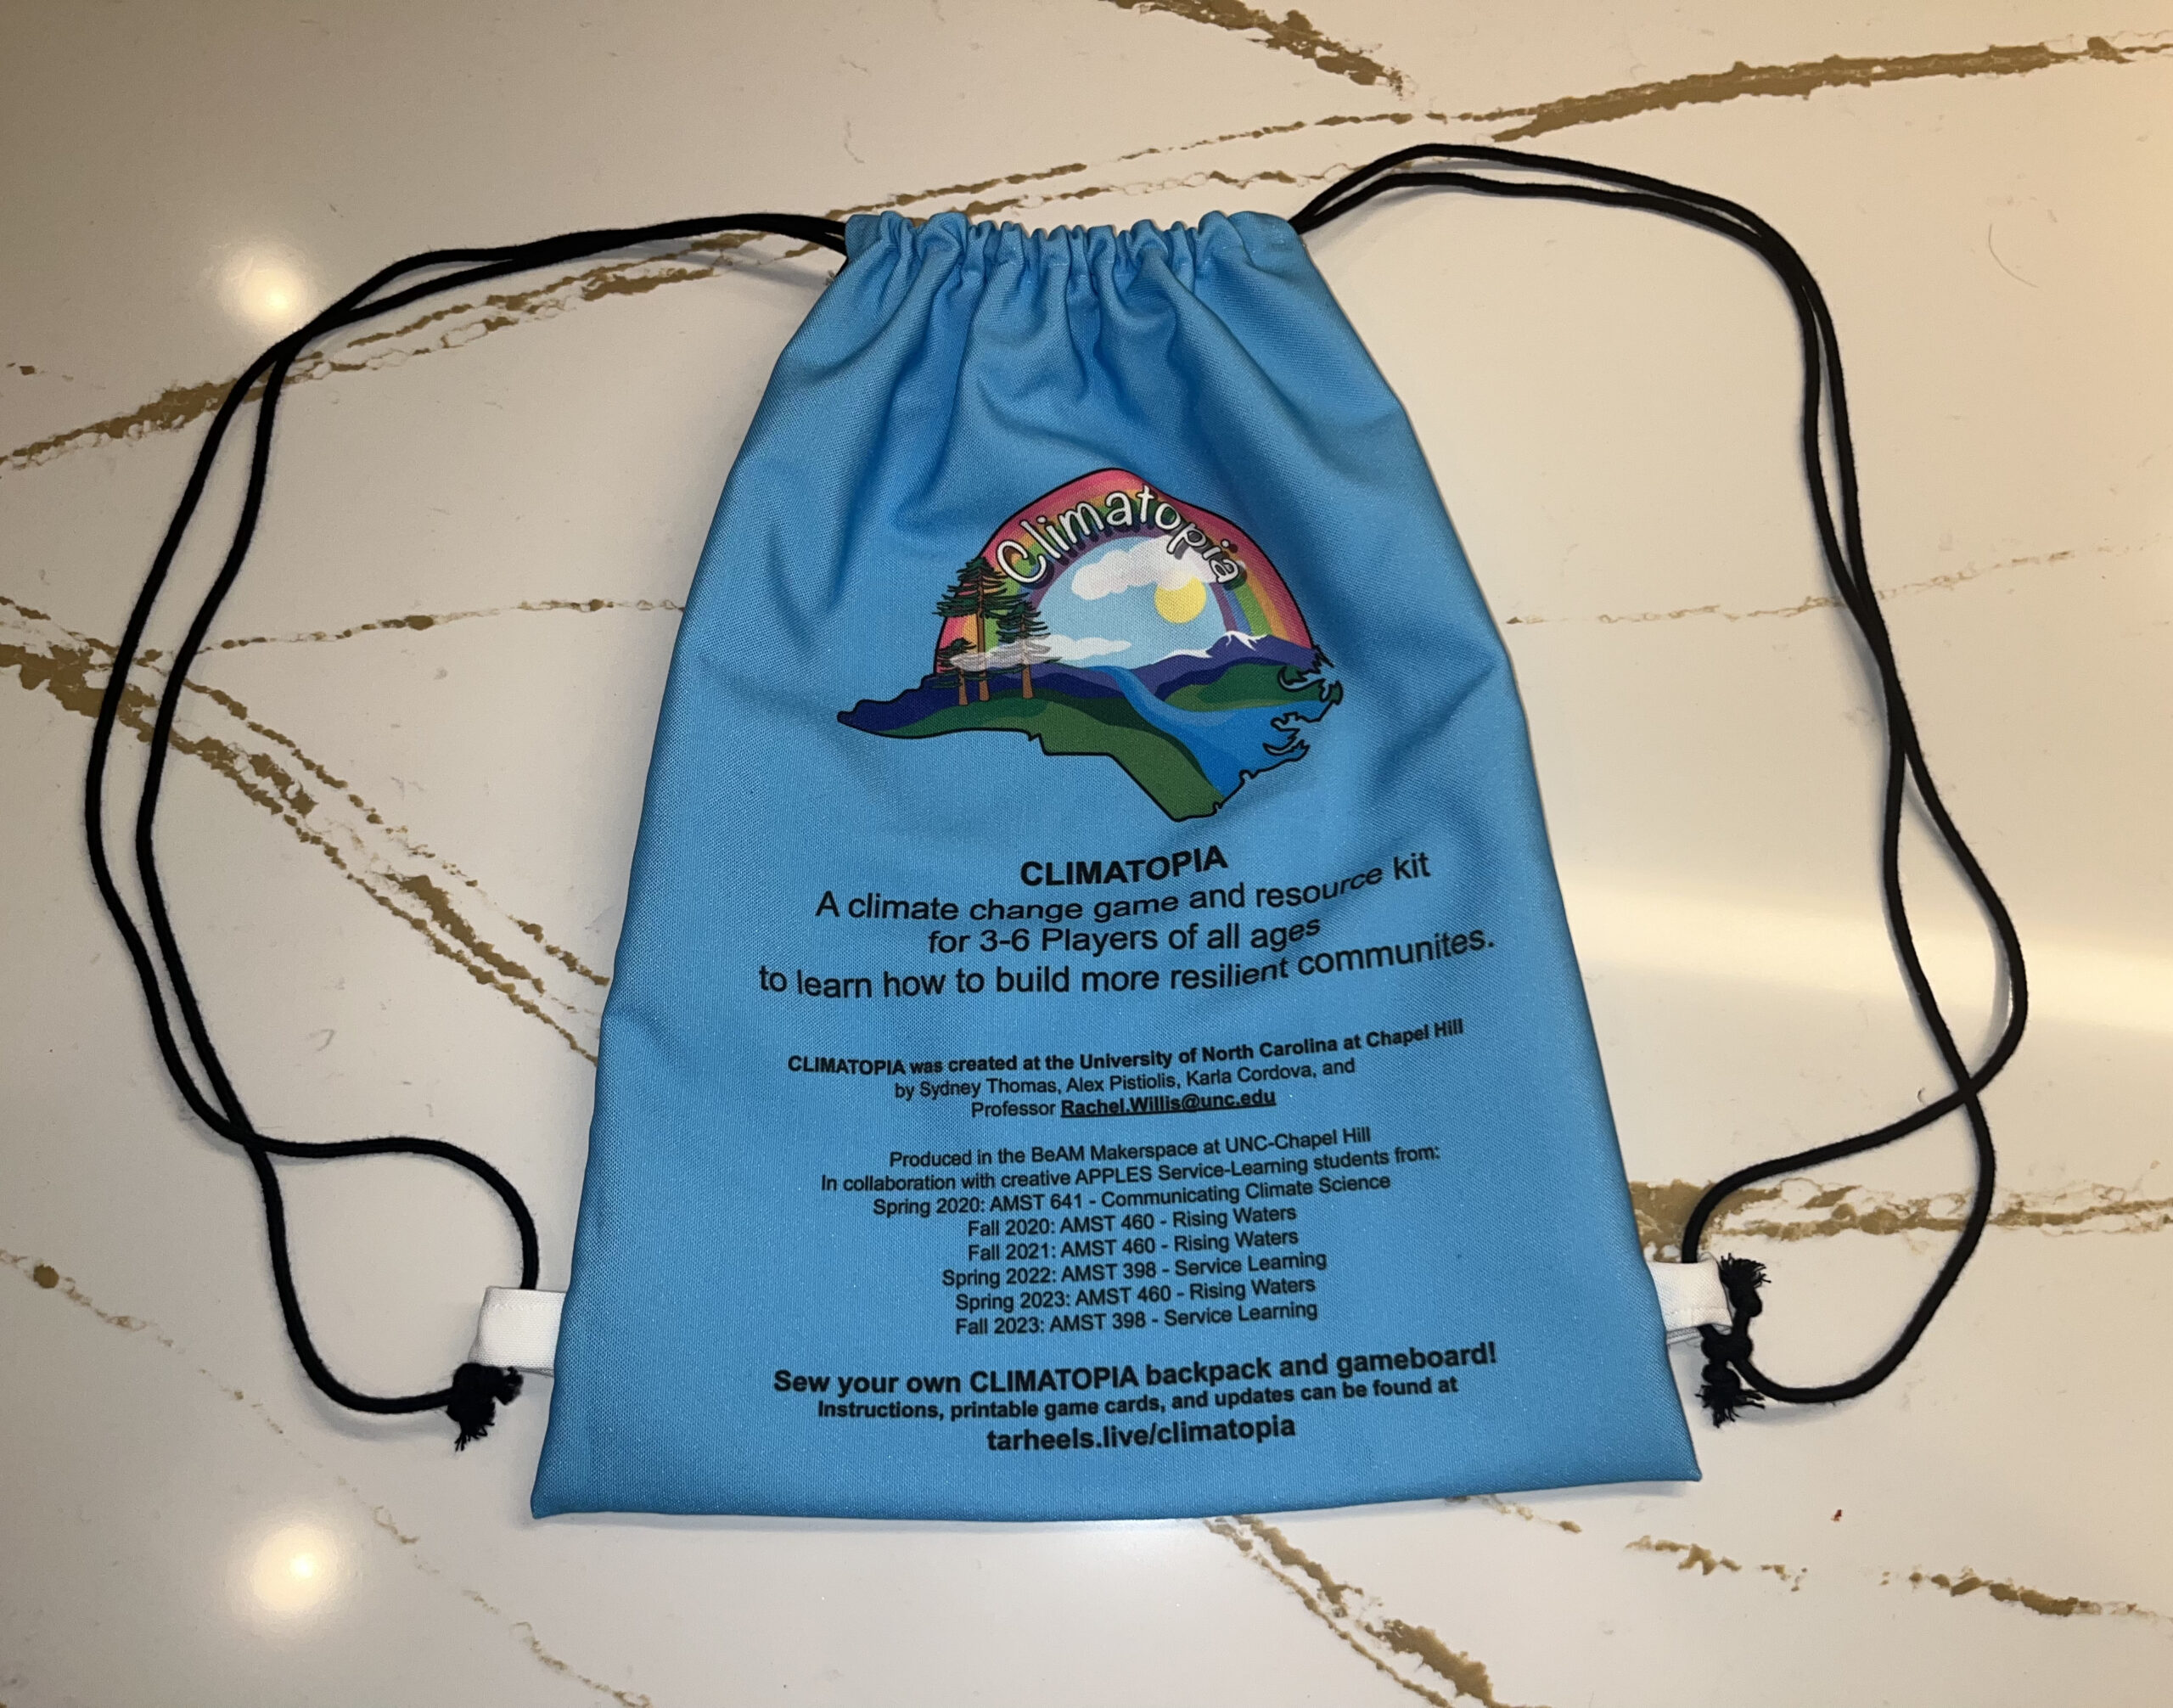 Completed Climatopia drawstring bag on white surface